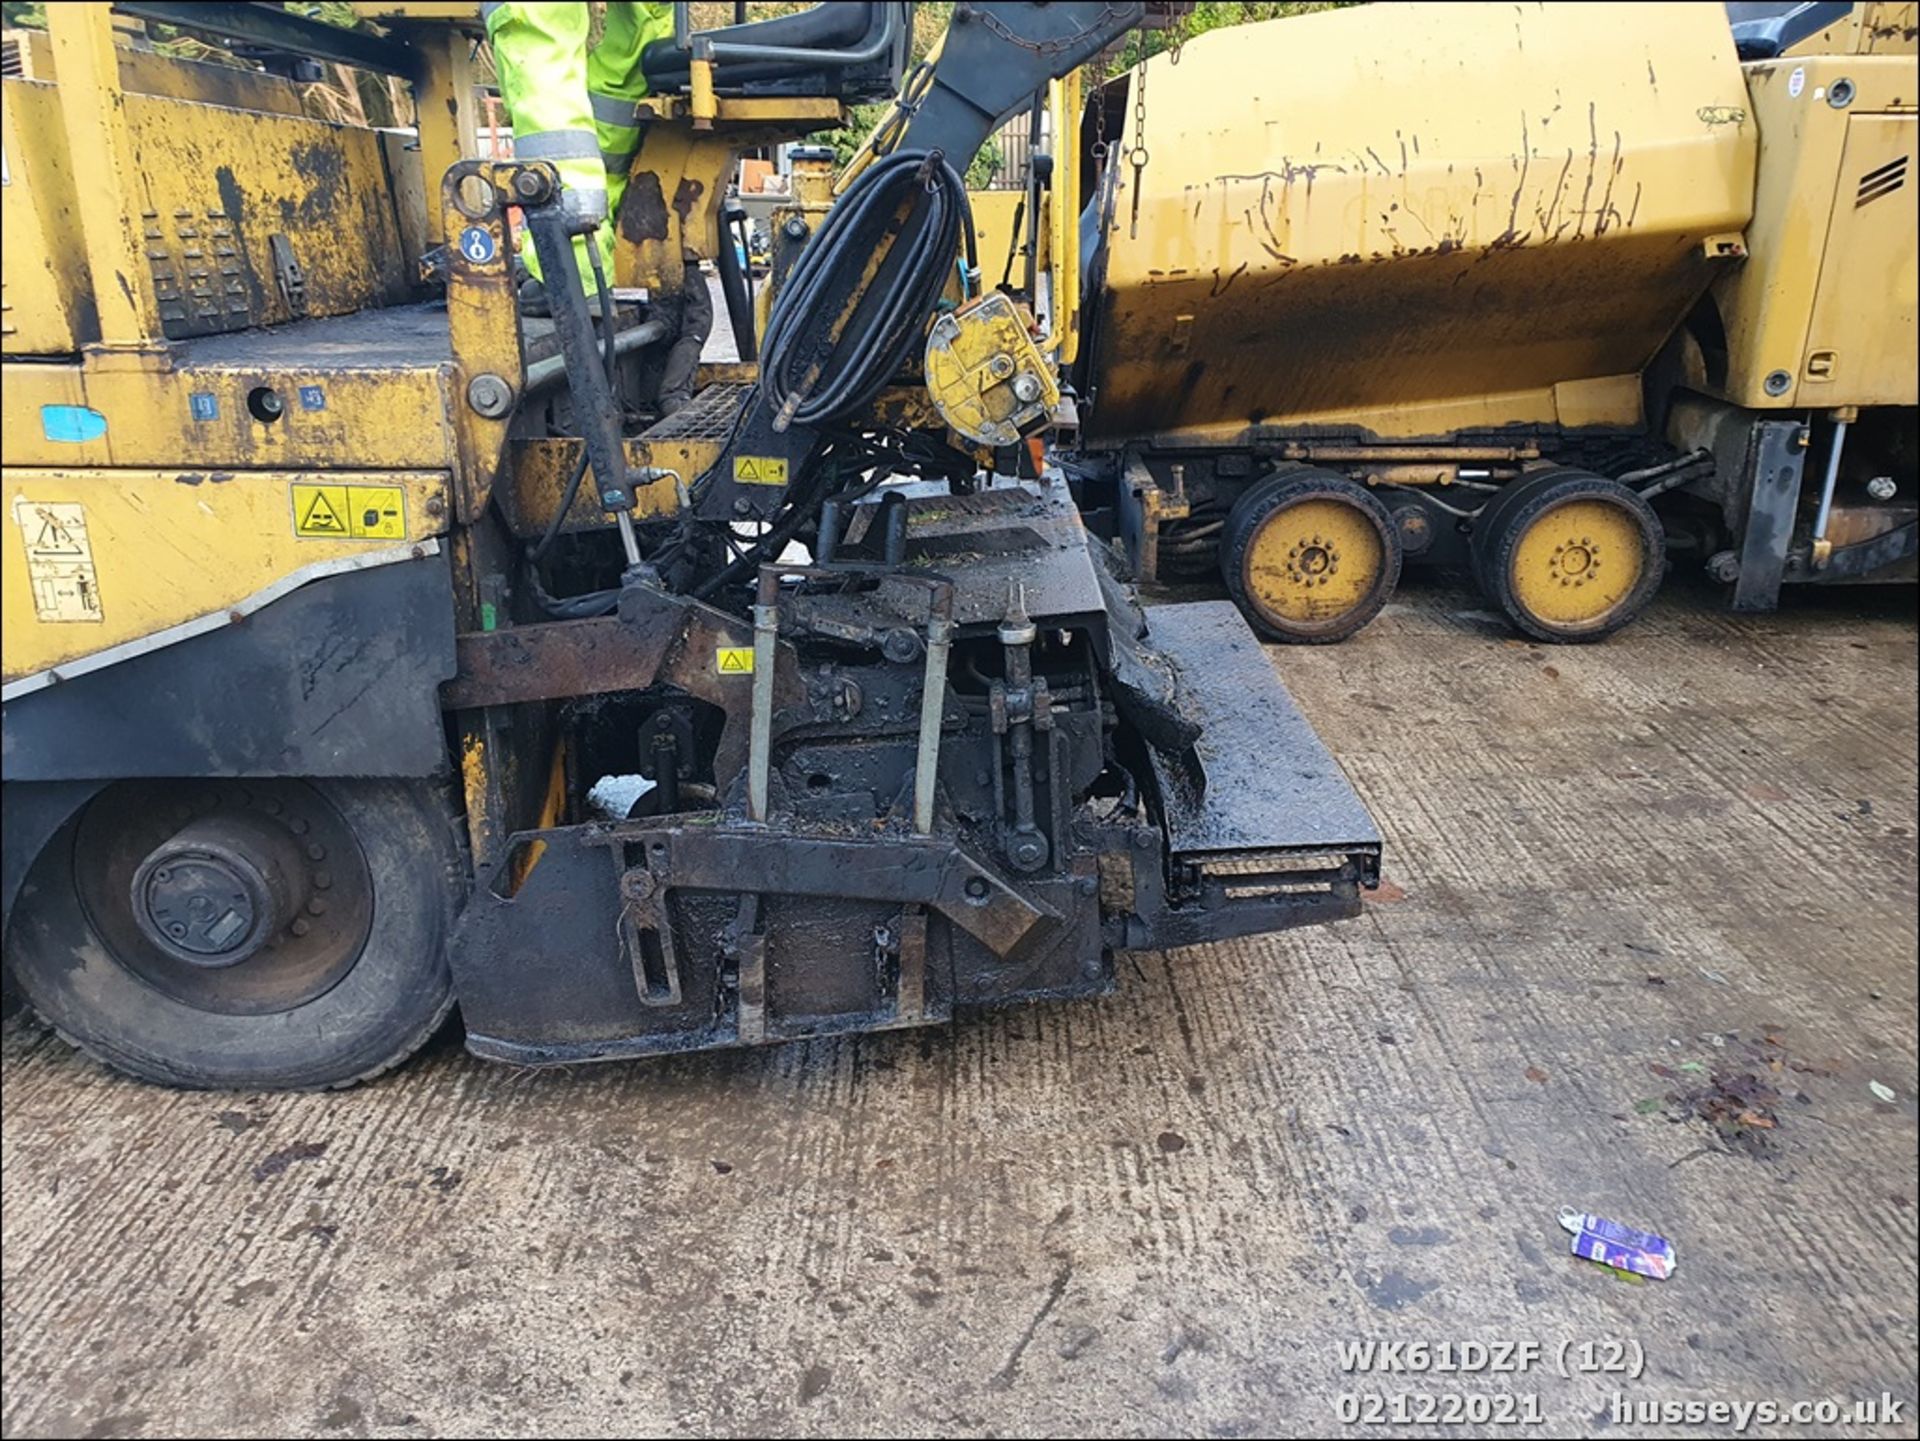 AMMANN PW2700 PAVER WK61DZF V5 & SERVICE PRINT OUT. 5842HRS - Image 12 of 28